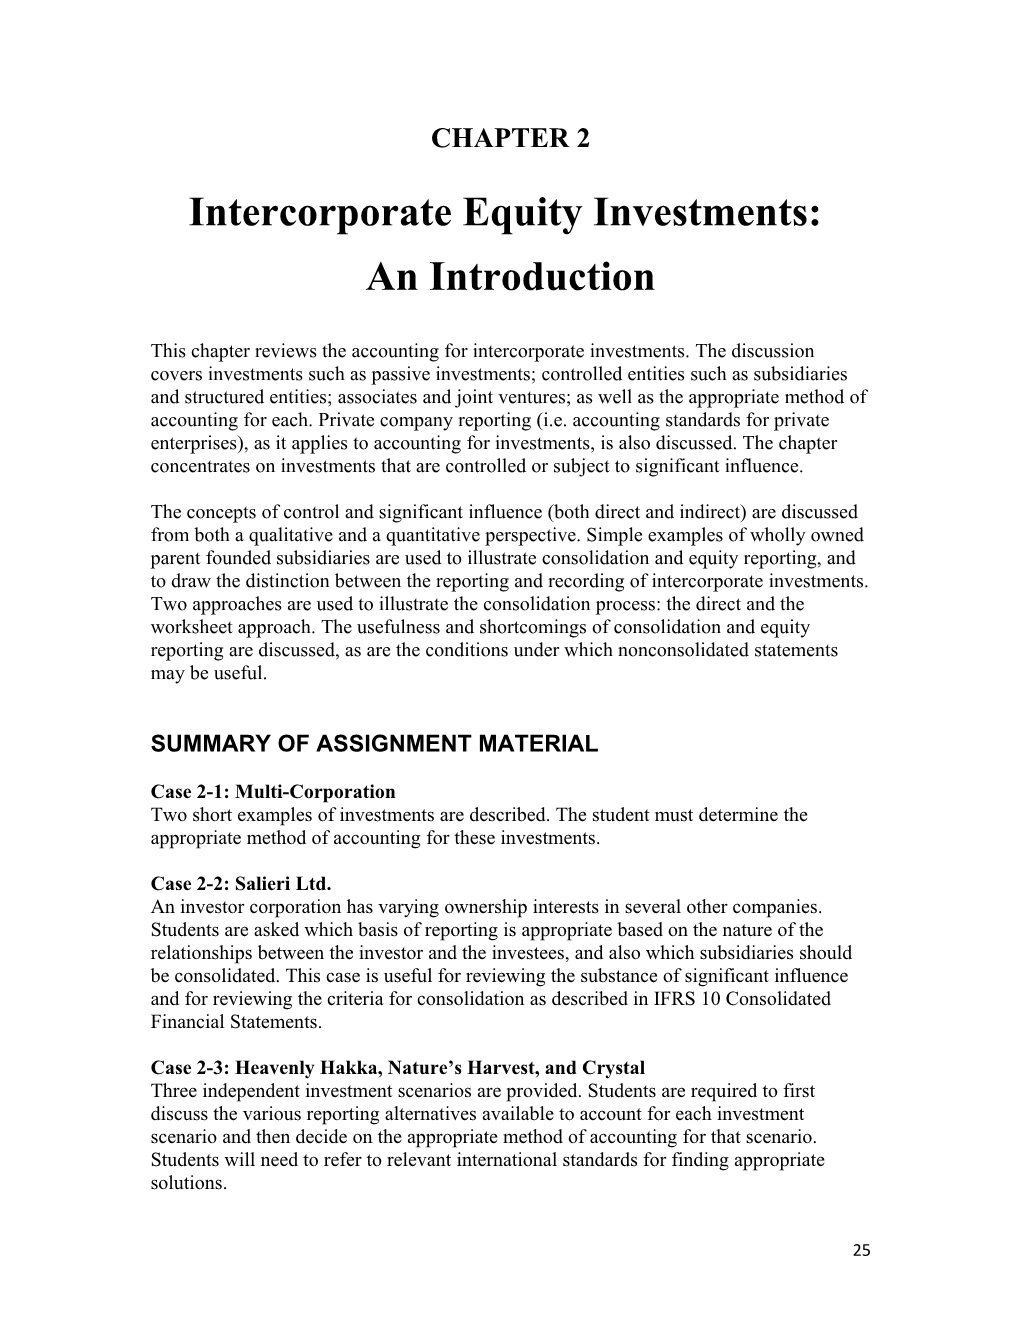 Intercorporate Equity Investments